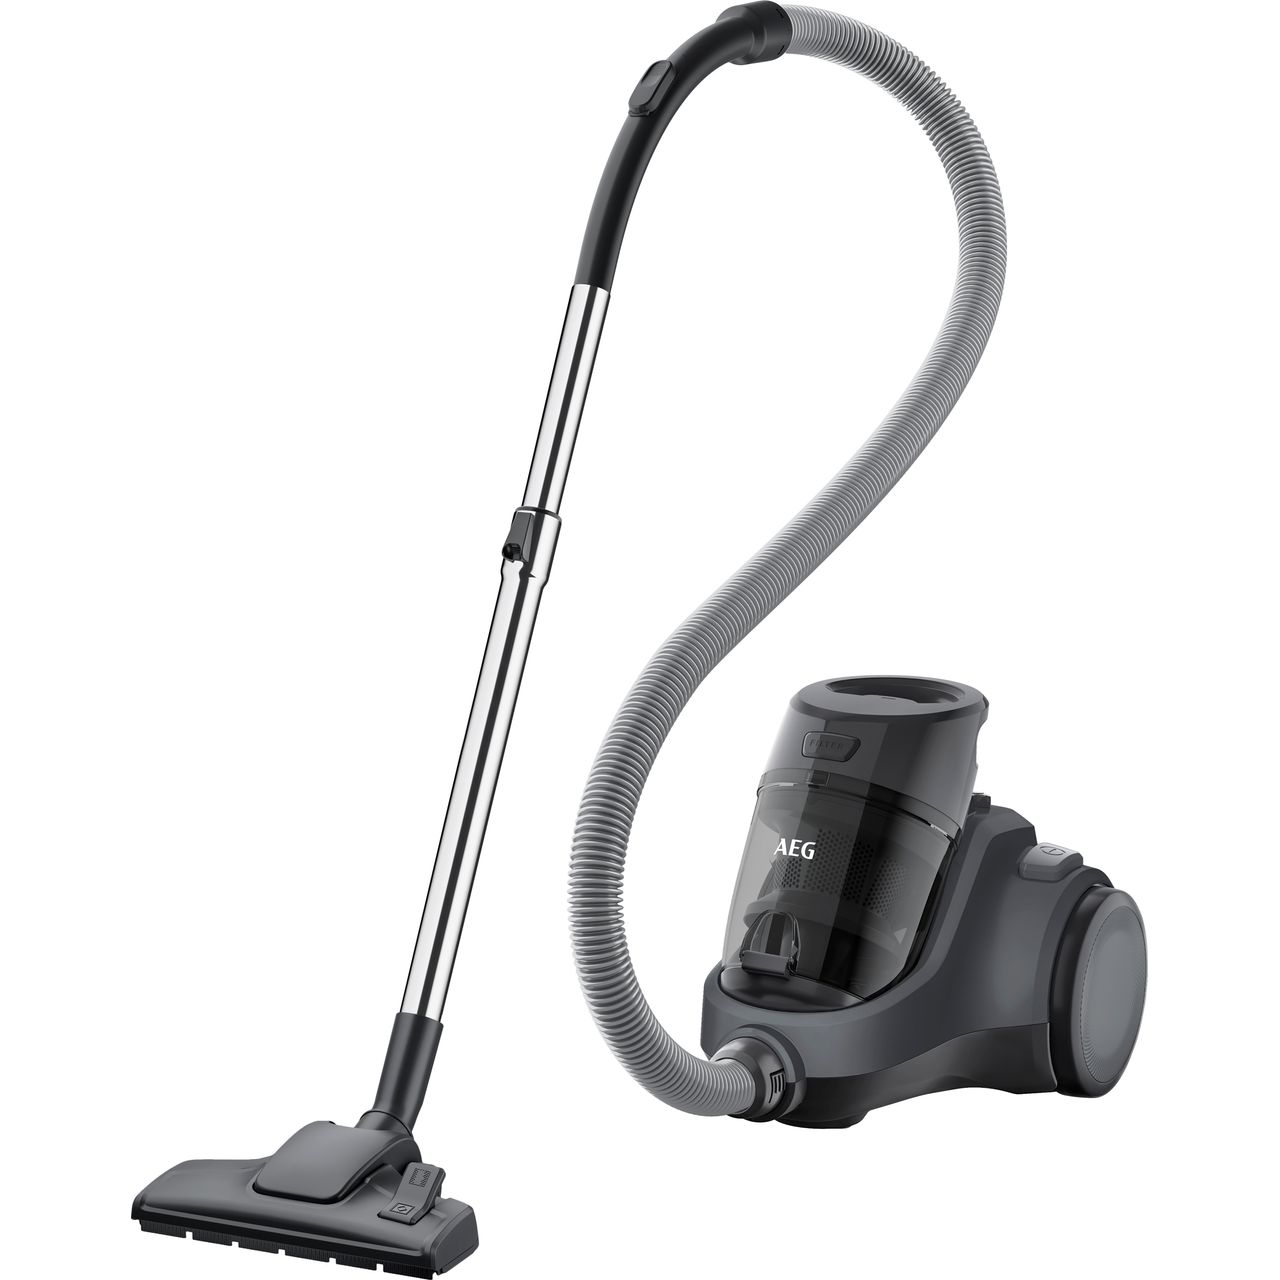 AEG LX5-2-4T Cylinder Vacuum Cleaner Review